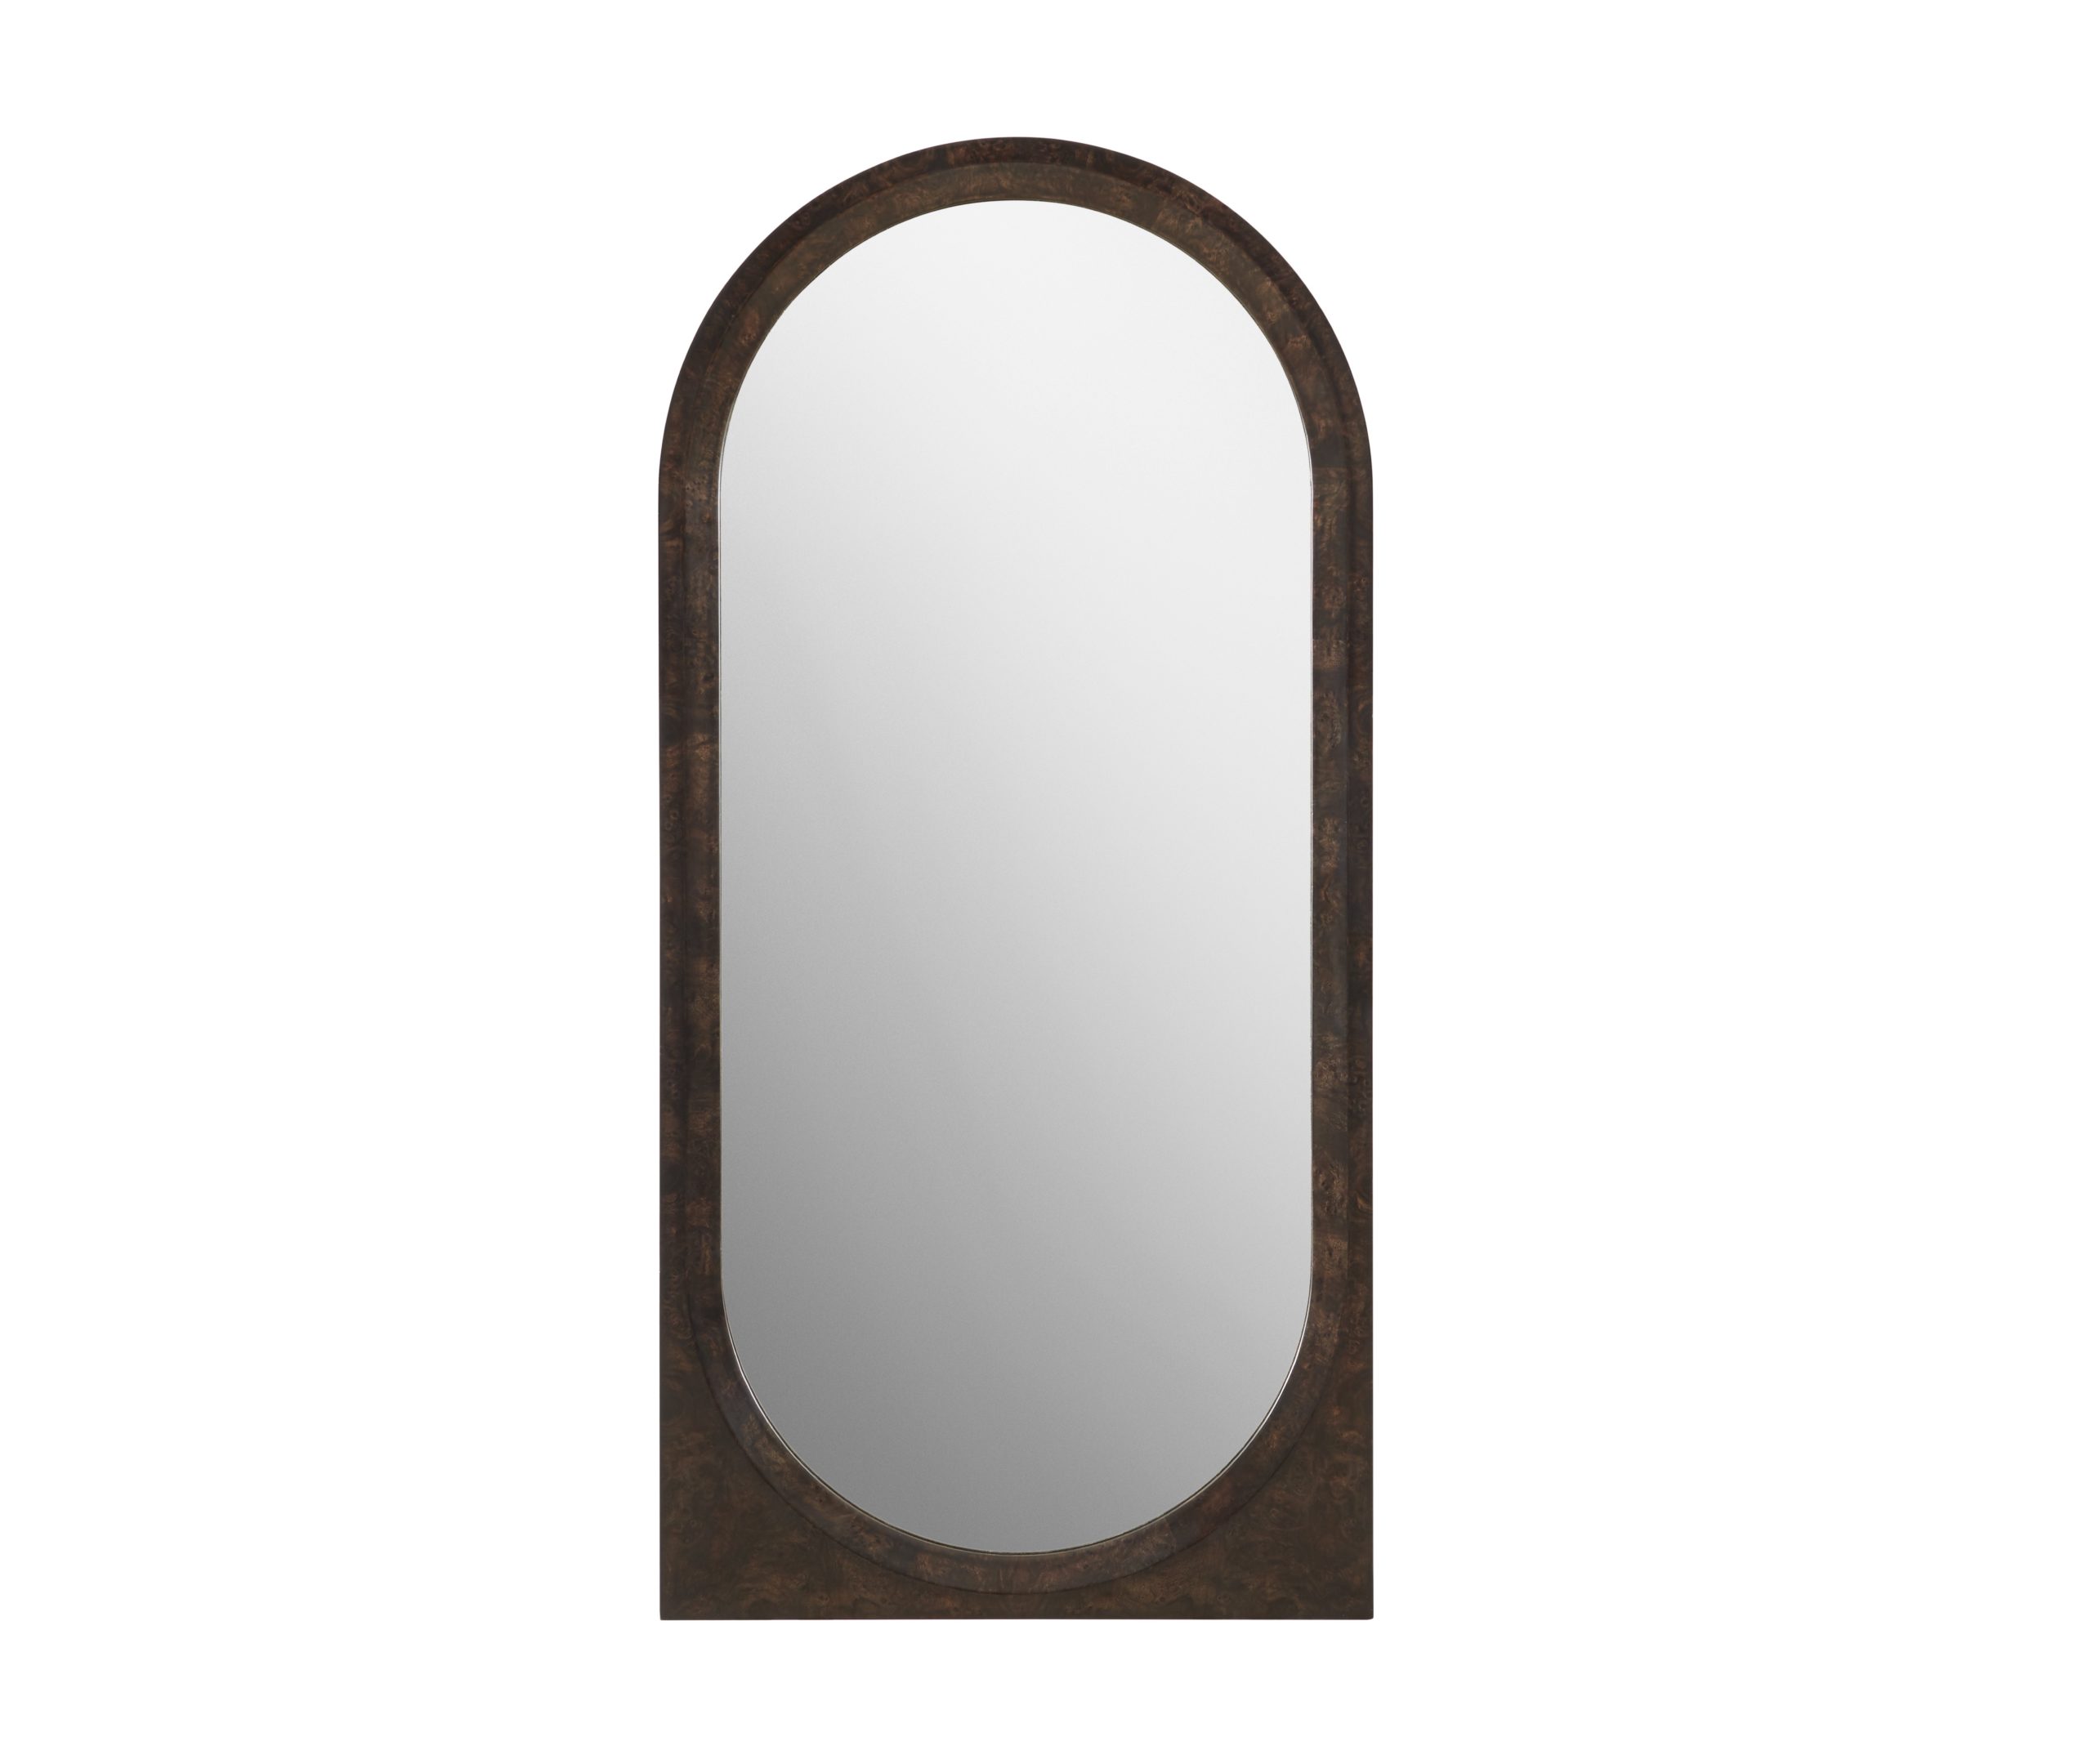 Baker_products_ellipse_mirror_WNWN_BAA3013_FRONT-scaled-1